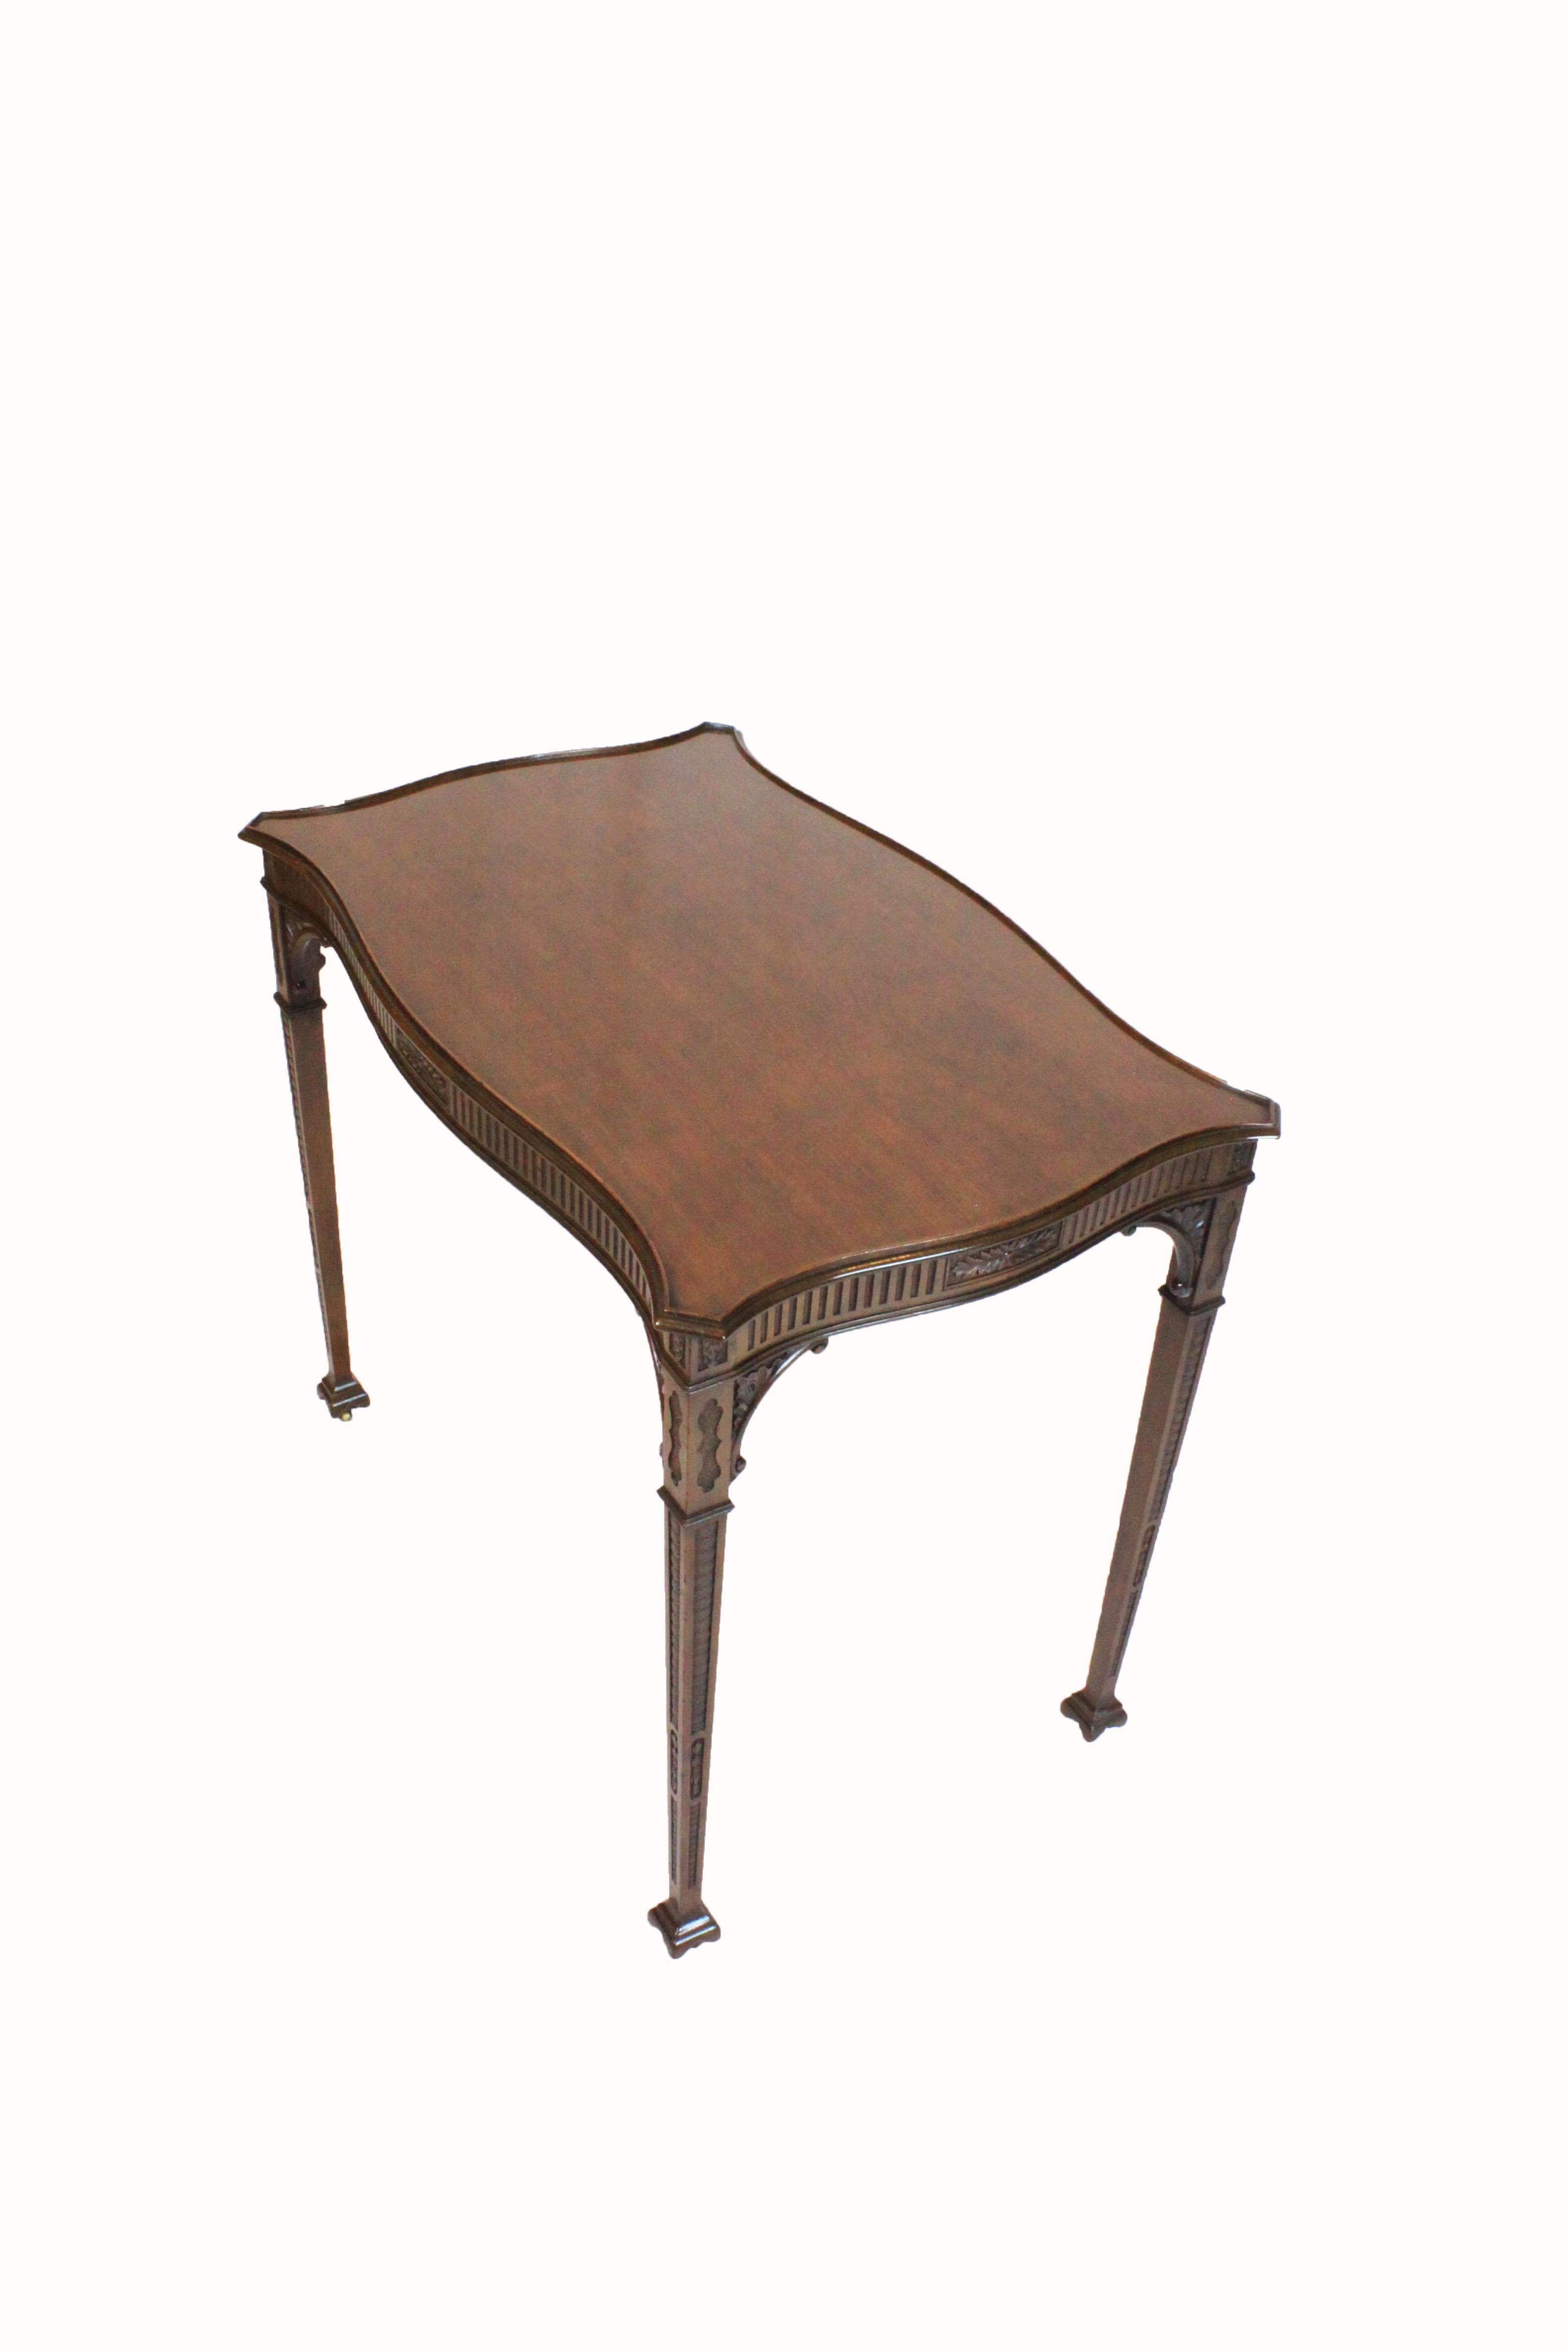 Adam Style Mahogany Serpentine Silver Table For Sale